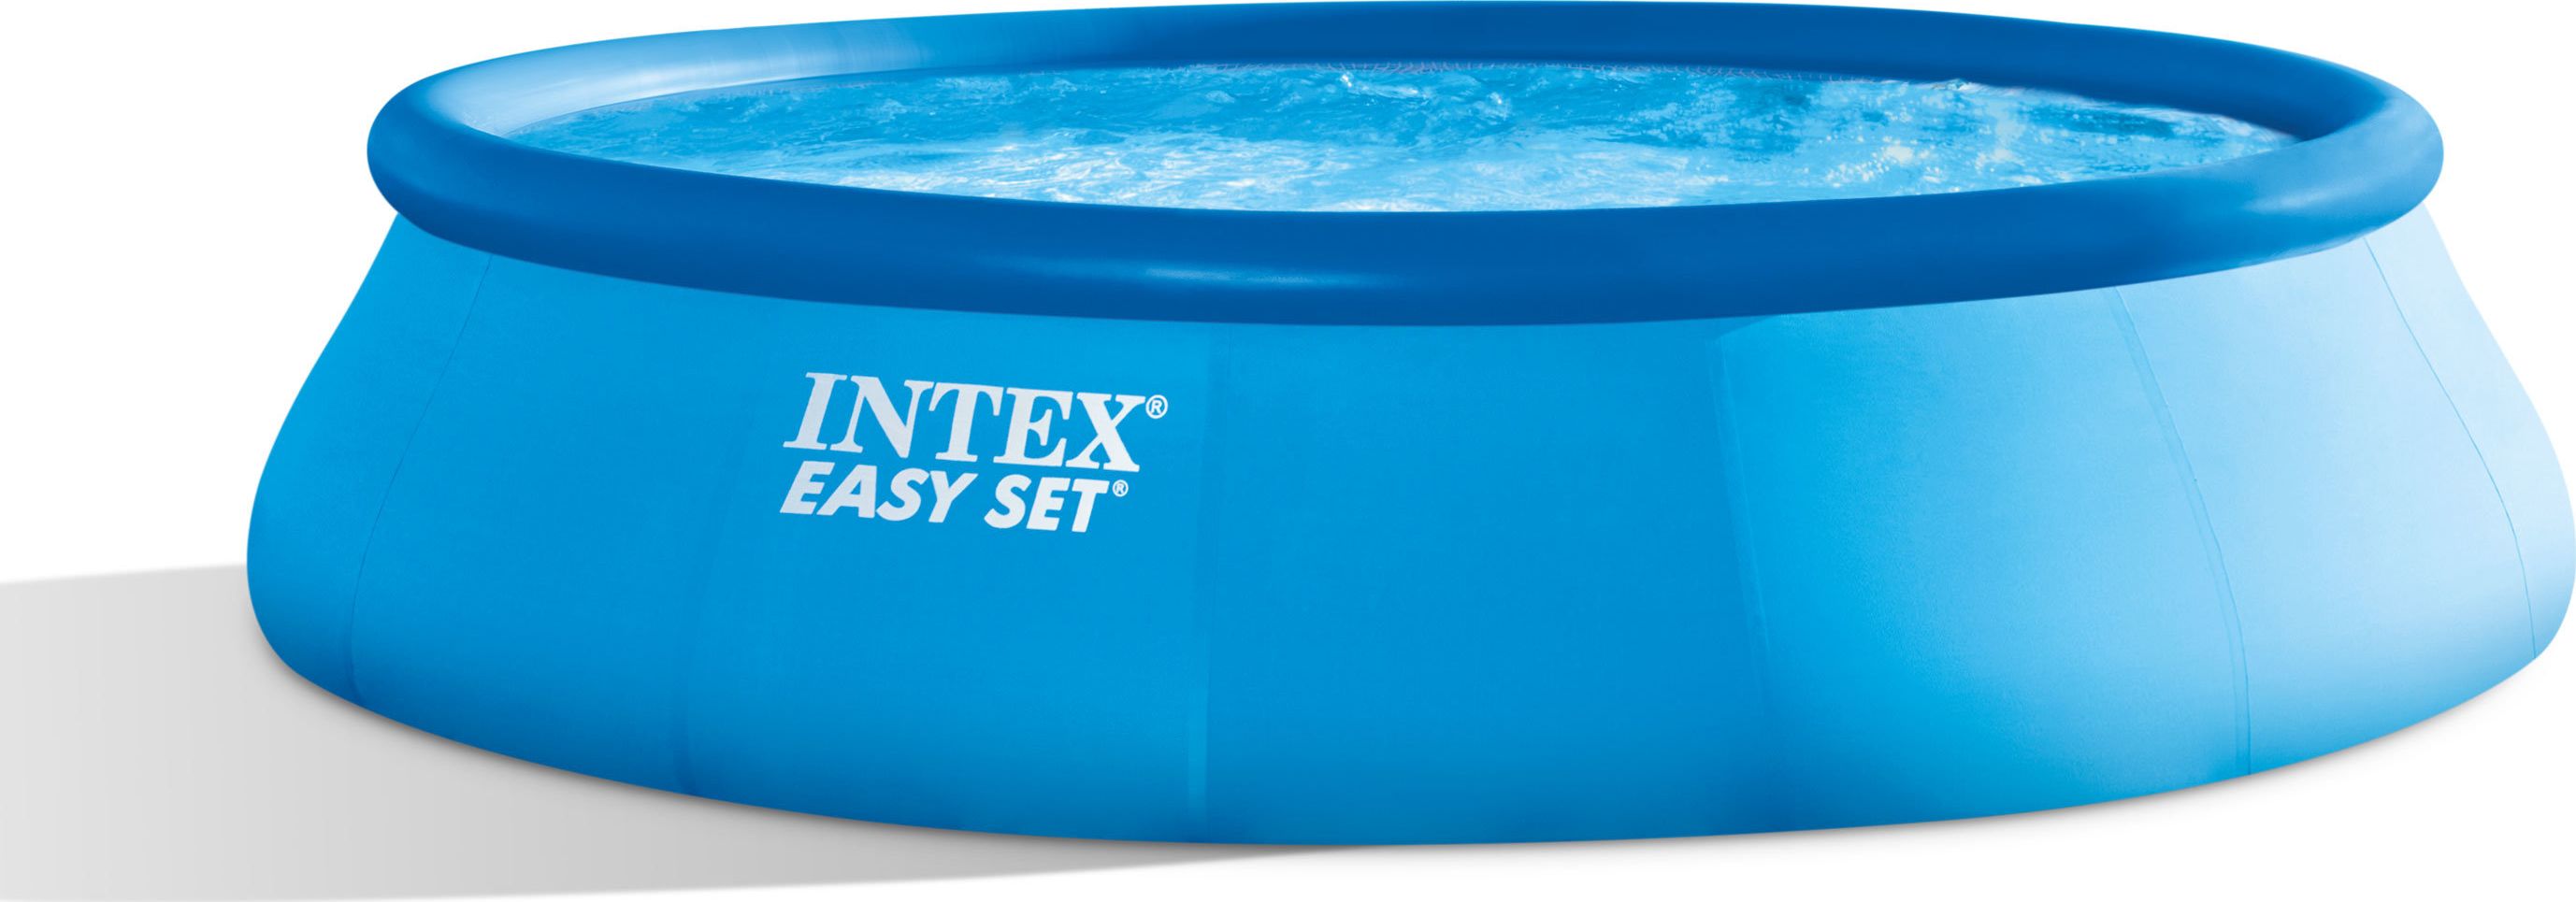 Intex Easy Set Pool Set with Filter Pump, Safety Ladder, Ground Cloth, Cover Blue, Age 6+, 457x107  cm Baseins